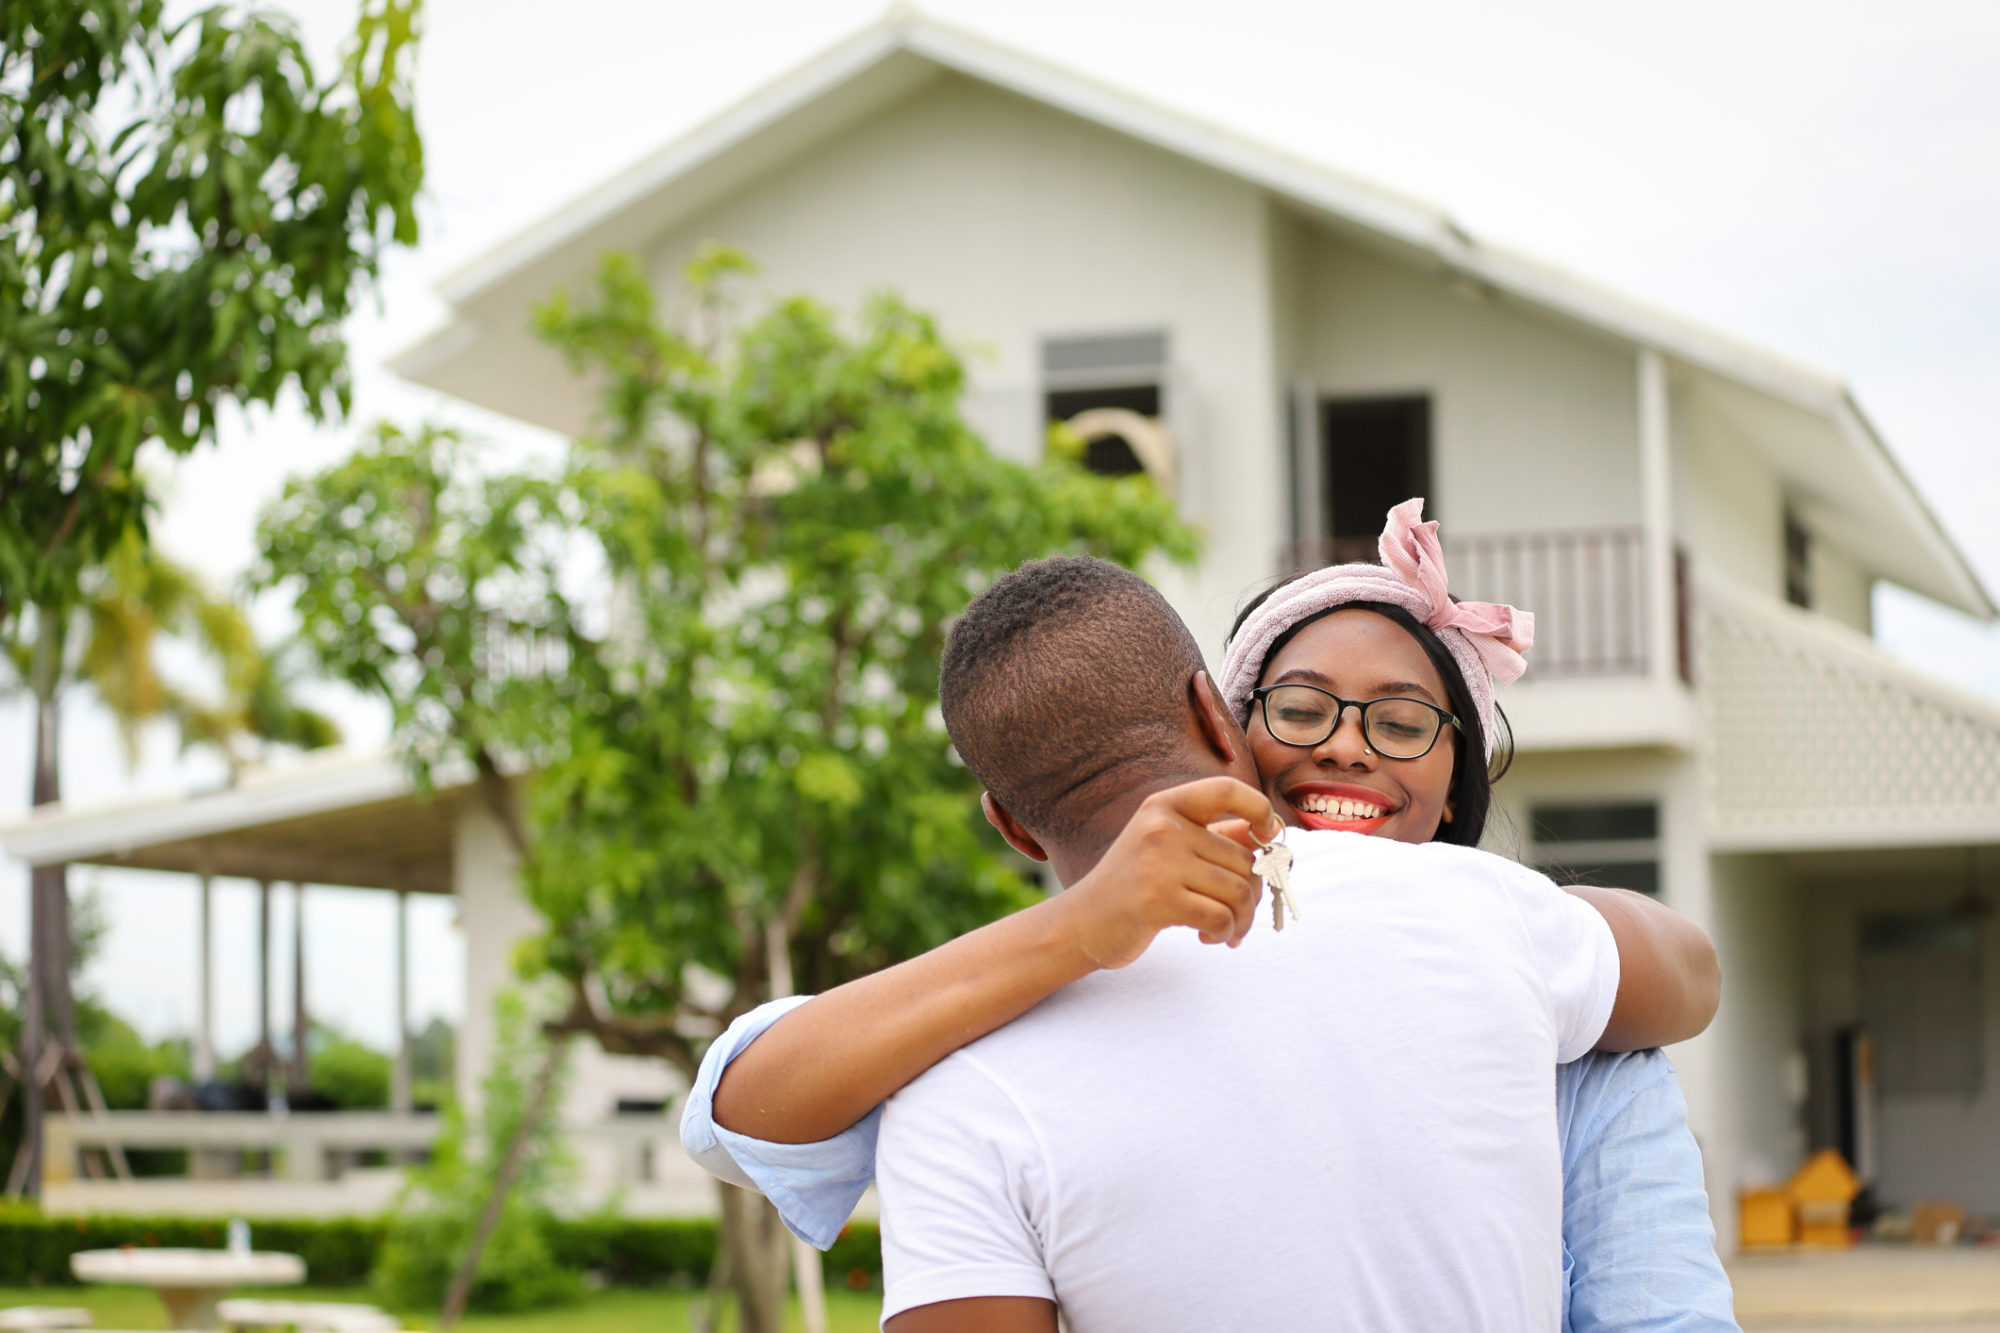 Wife hugging her husband in front of the house they just move in while holding key for housing, relocation and new family